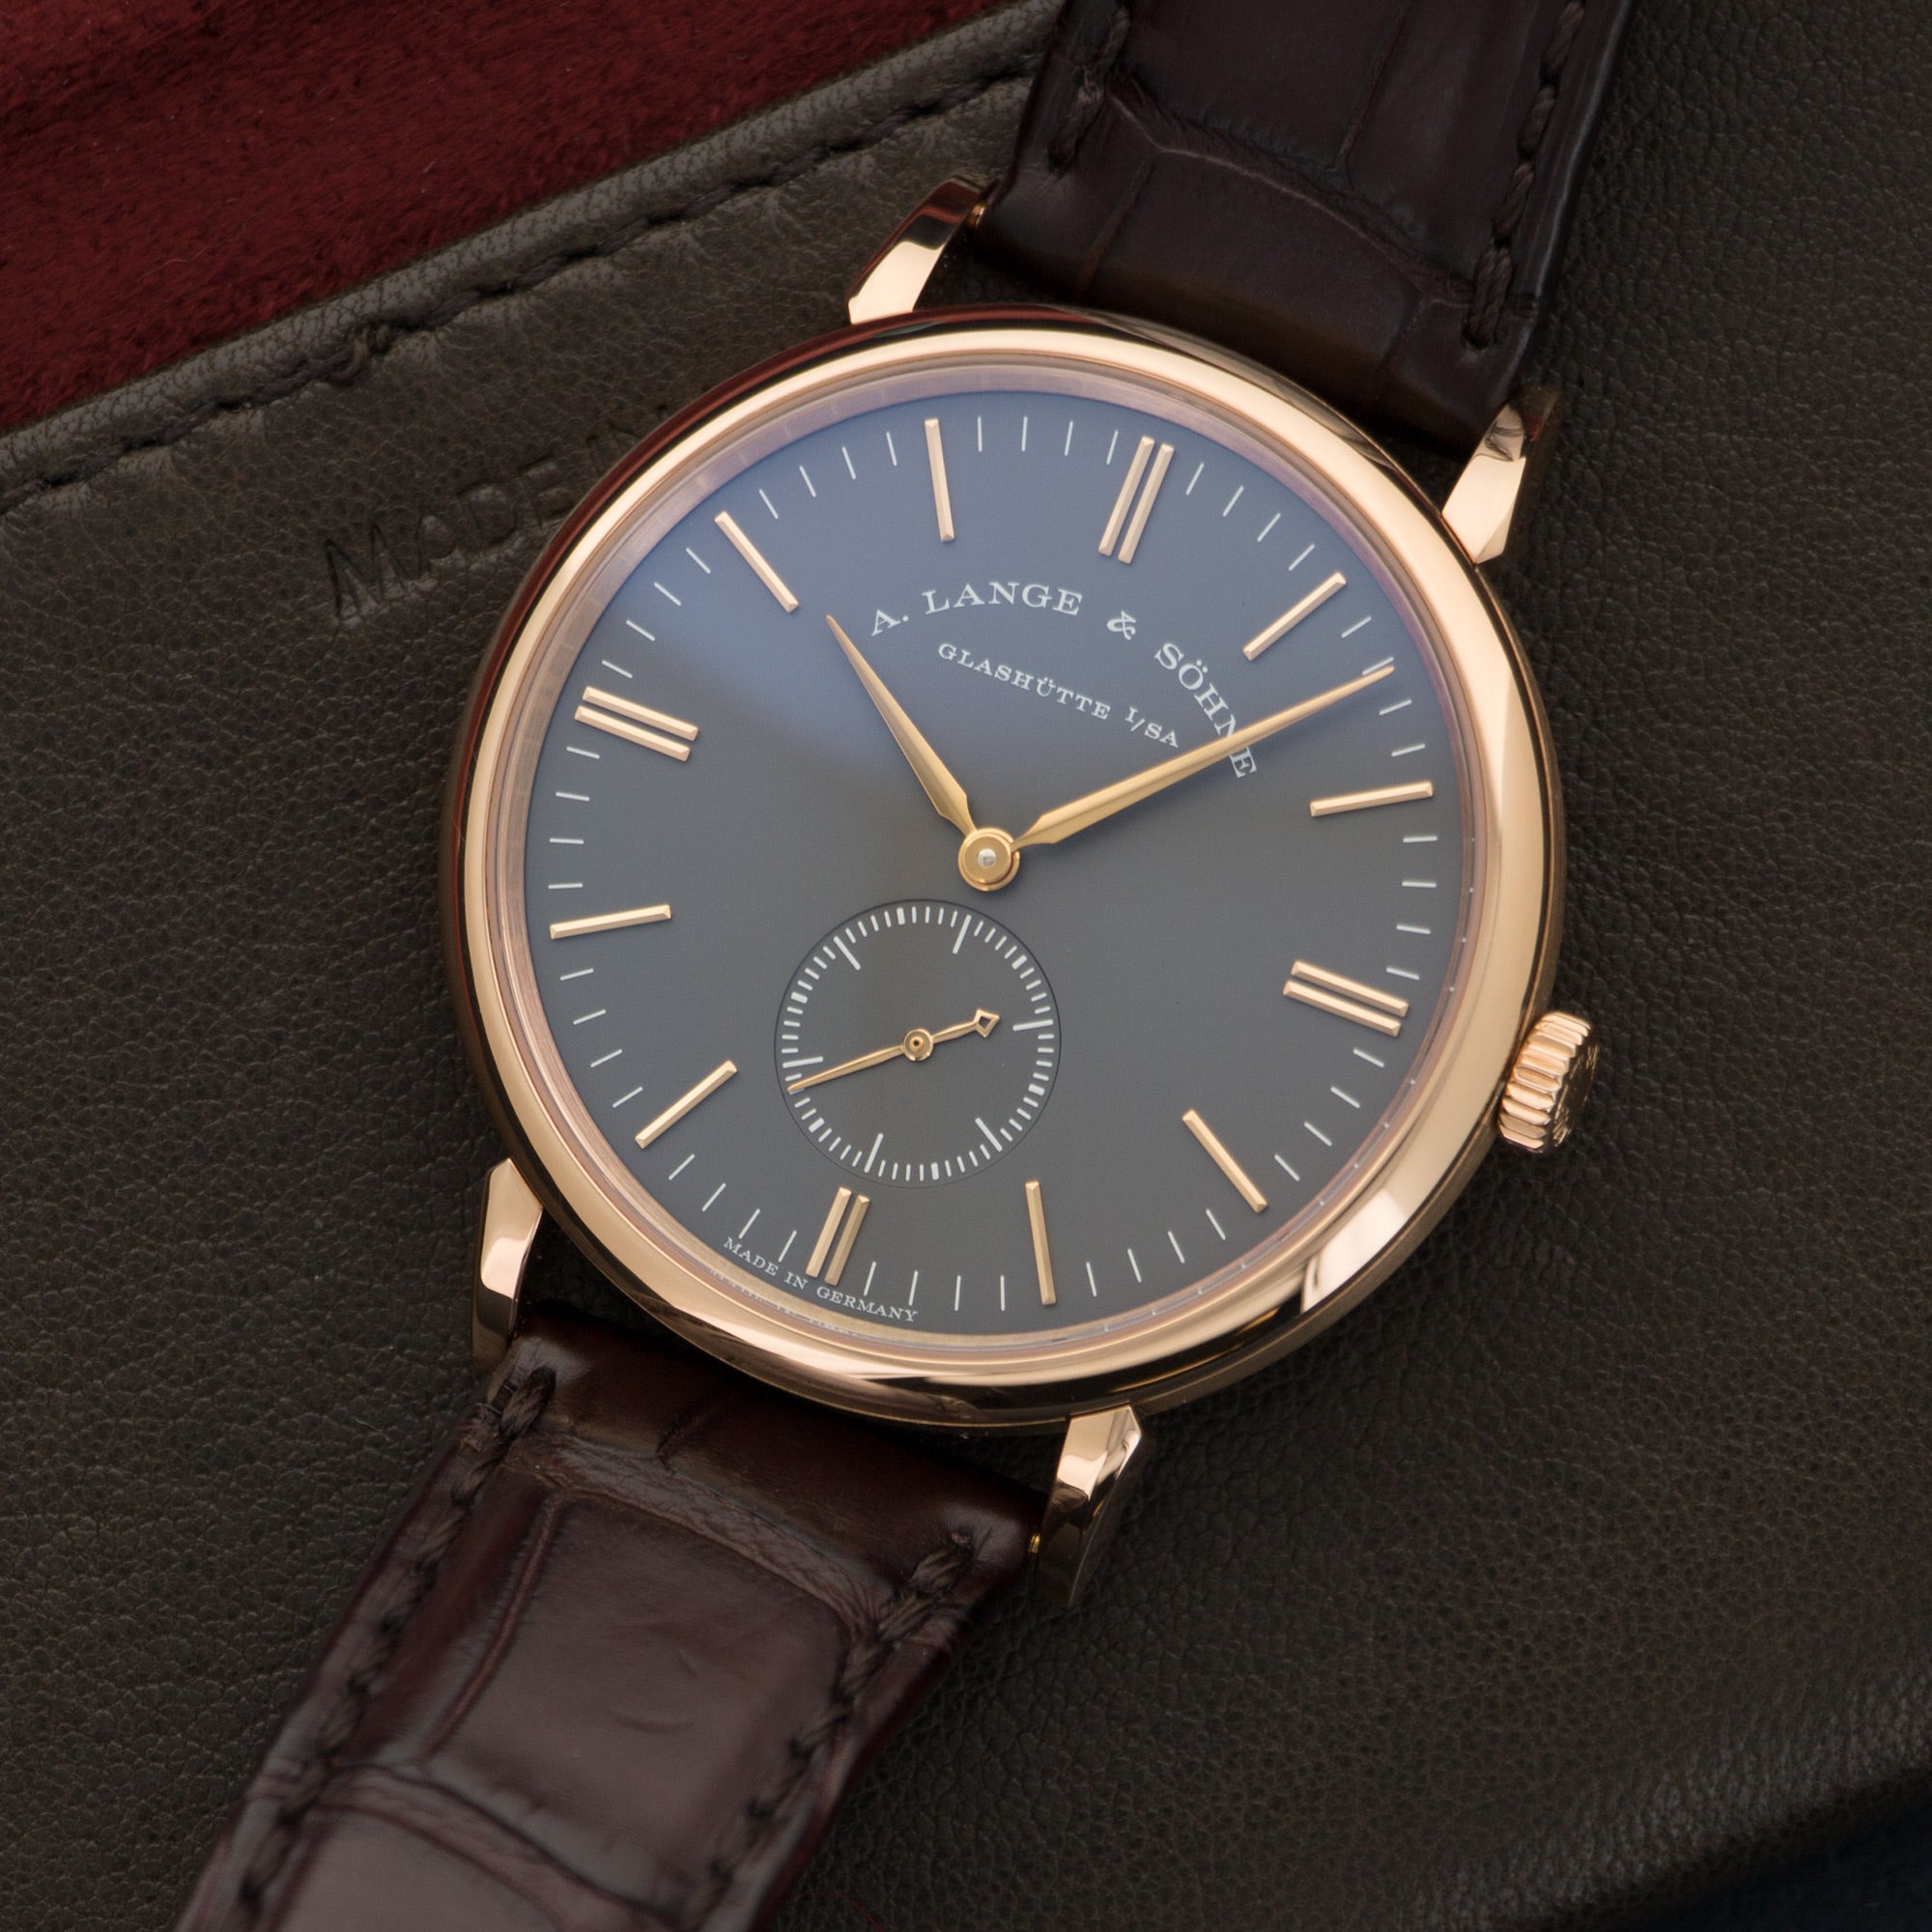 A. Lange & Sohne - A. Lange & Sohne Rose Gold Saxonia Watch Ref. 216.033 - The Keystone Watches